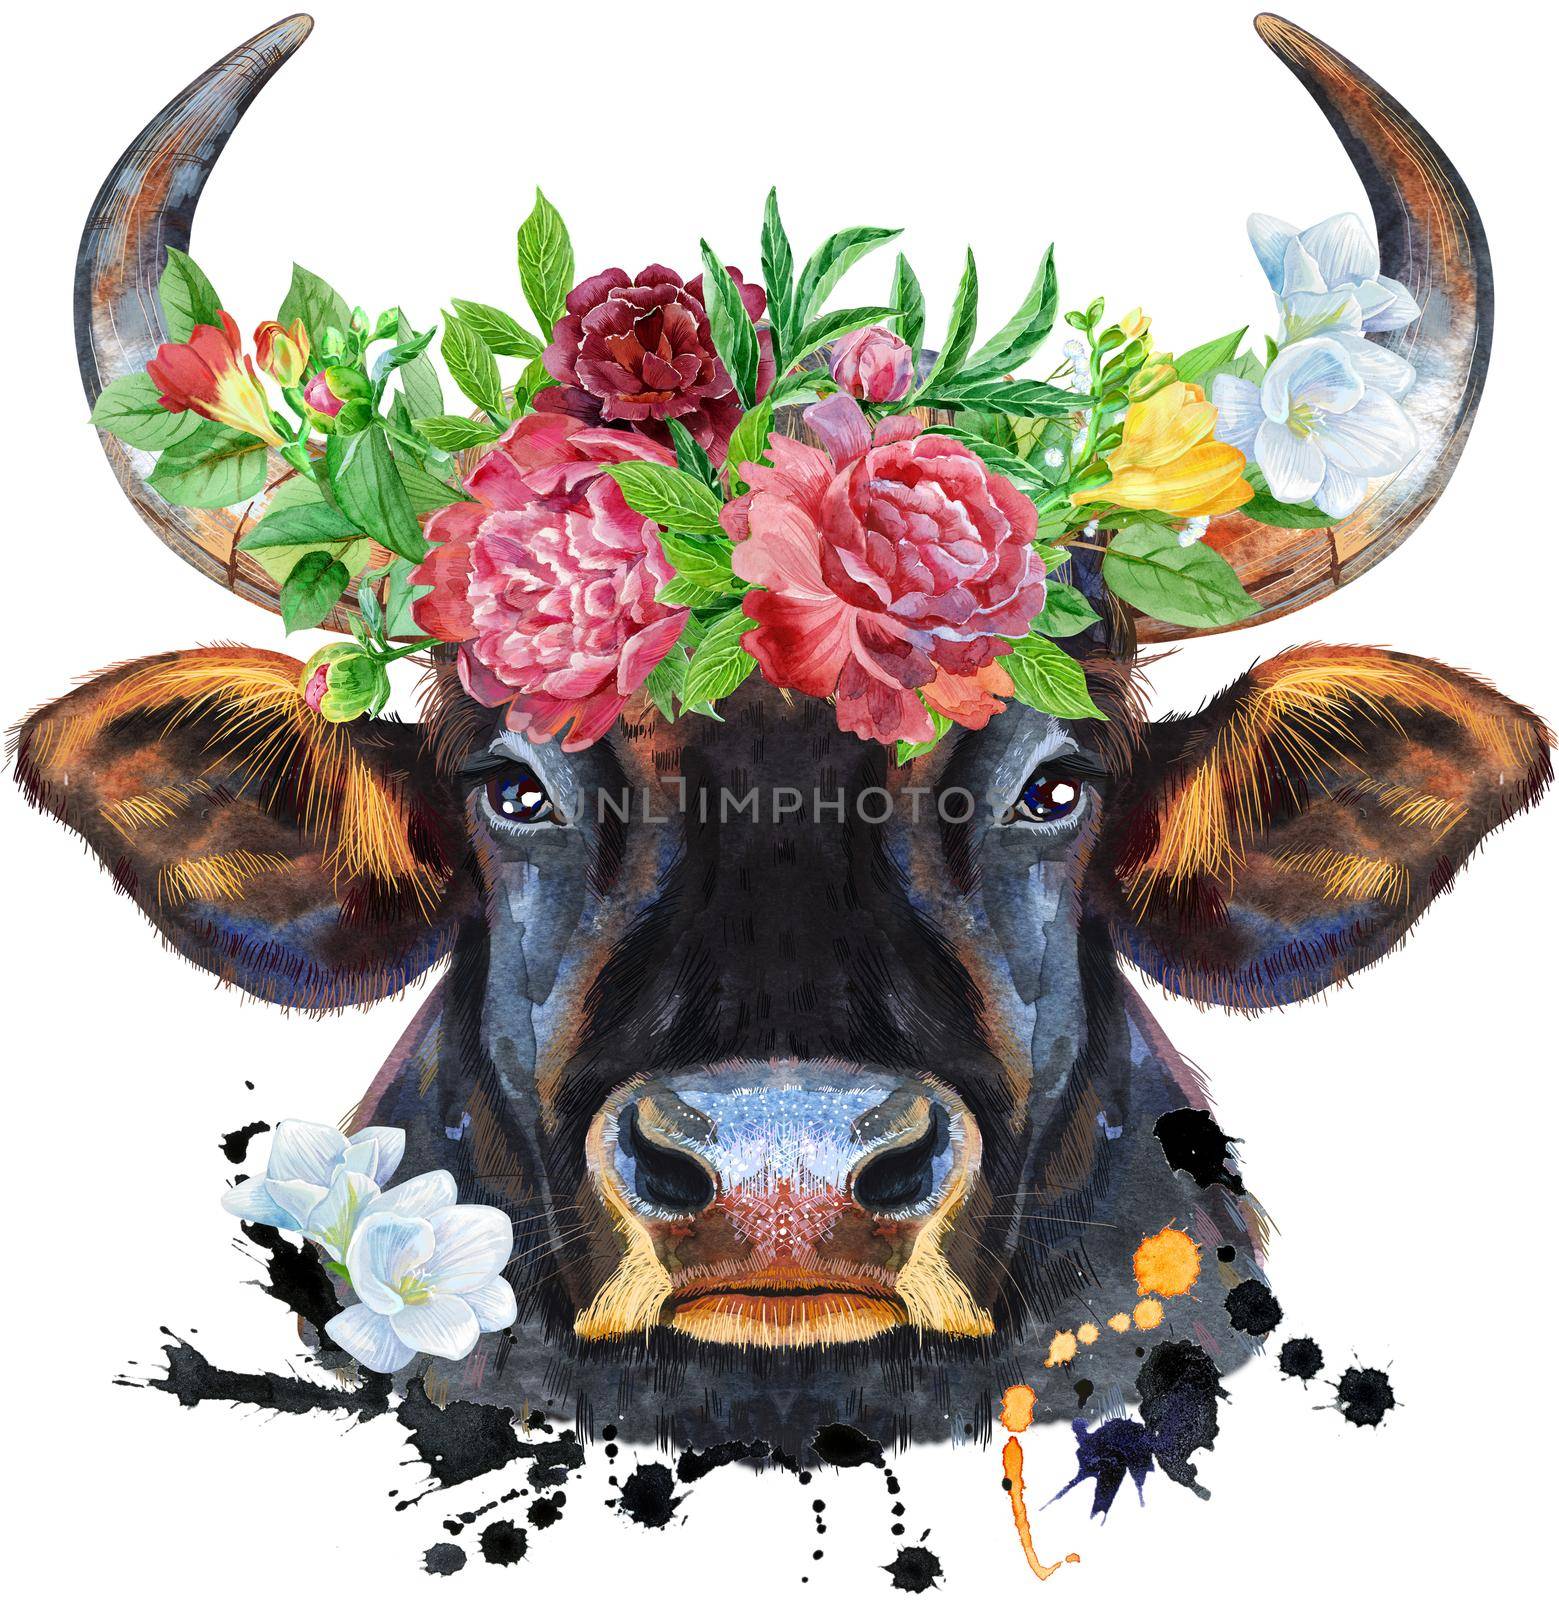 Bull in wreath of flowers. Watercolor graphics. Bull animal illustration with splashes watercolor textured background.